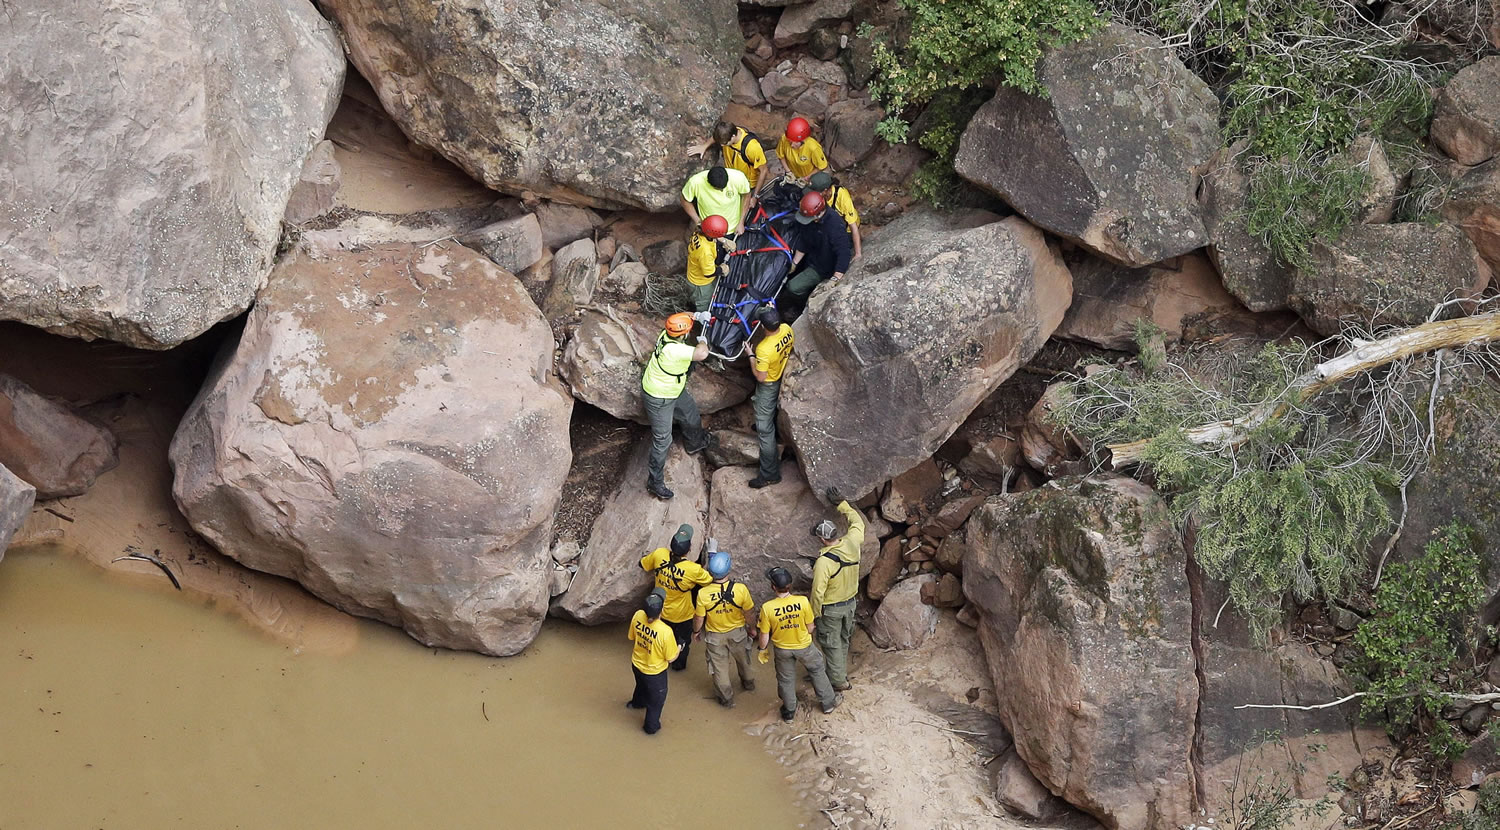 Search and rescue team members carry a body after it was found along Pine Creek, Wednesday, Sept. 16, 2015, in Zion National Park, near Springdale, Utah. Authorities are searching for other hikers killed in flash flooding that swept through a narrow canyon at Utah's Zion National Park.